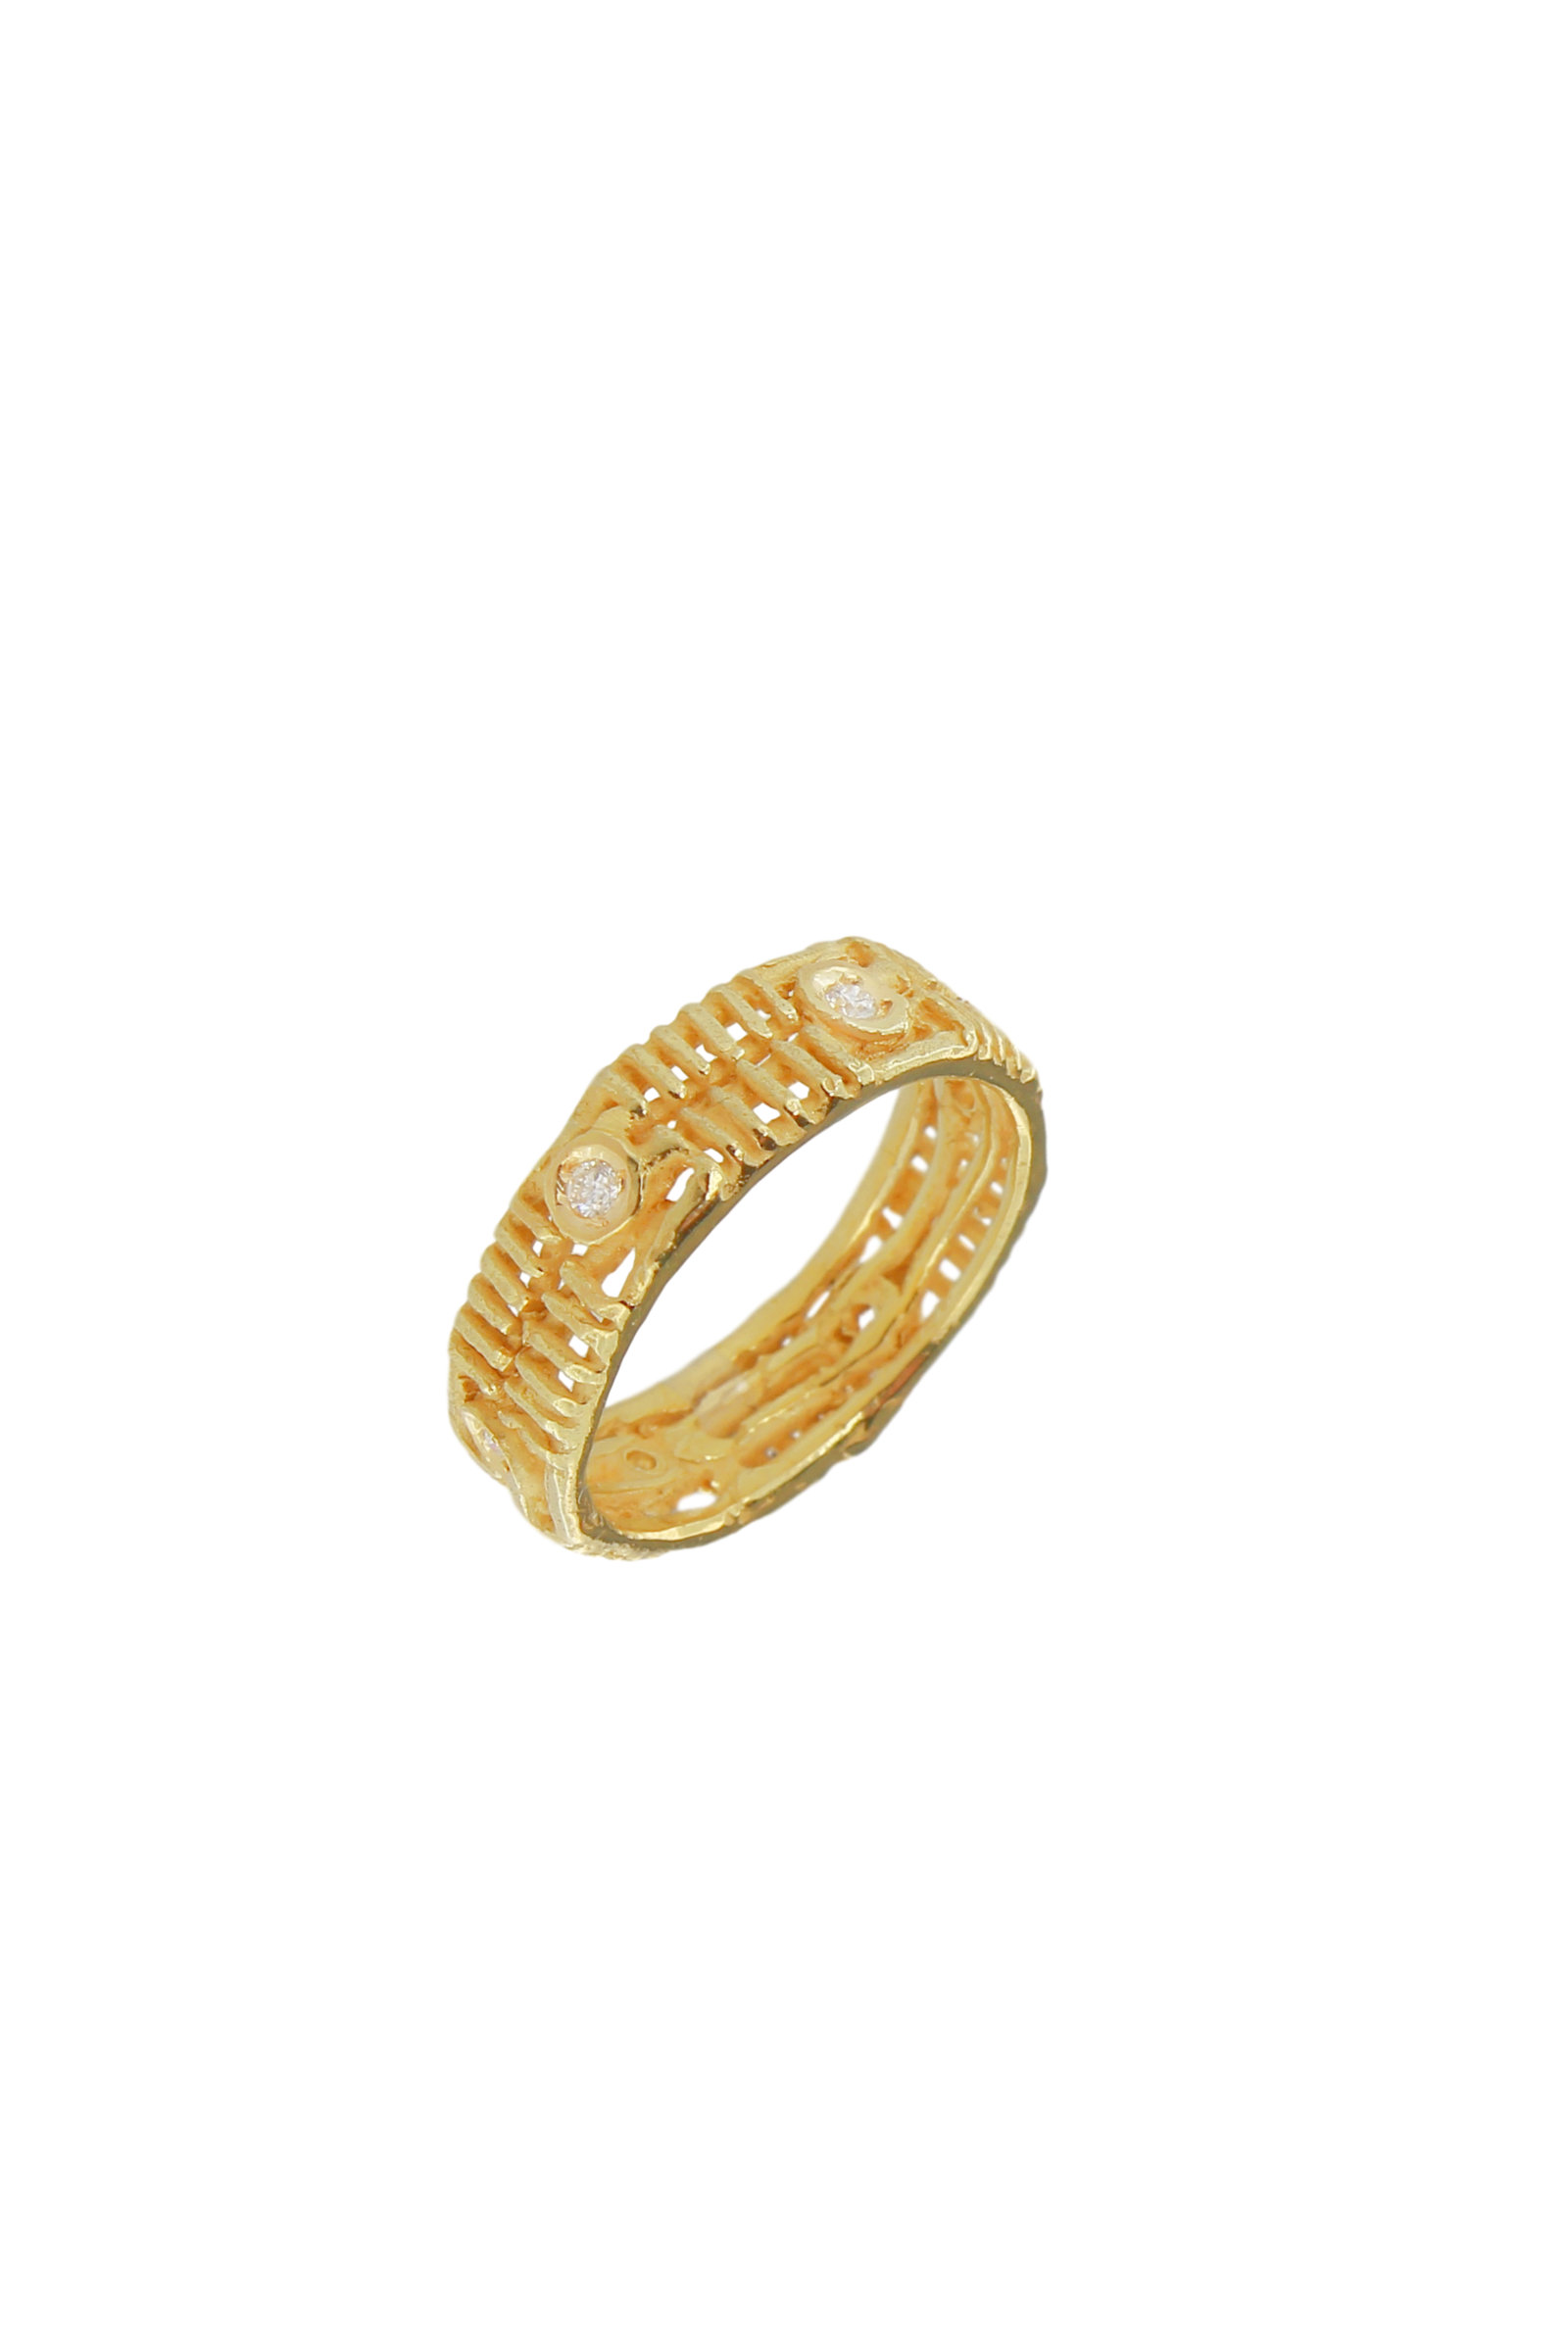 SE202B-18-Kt-Yellow-Gold-Band-Ring-with-Diamonds-1